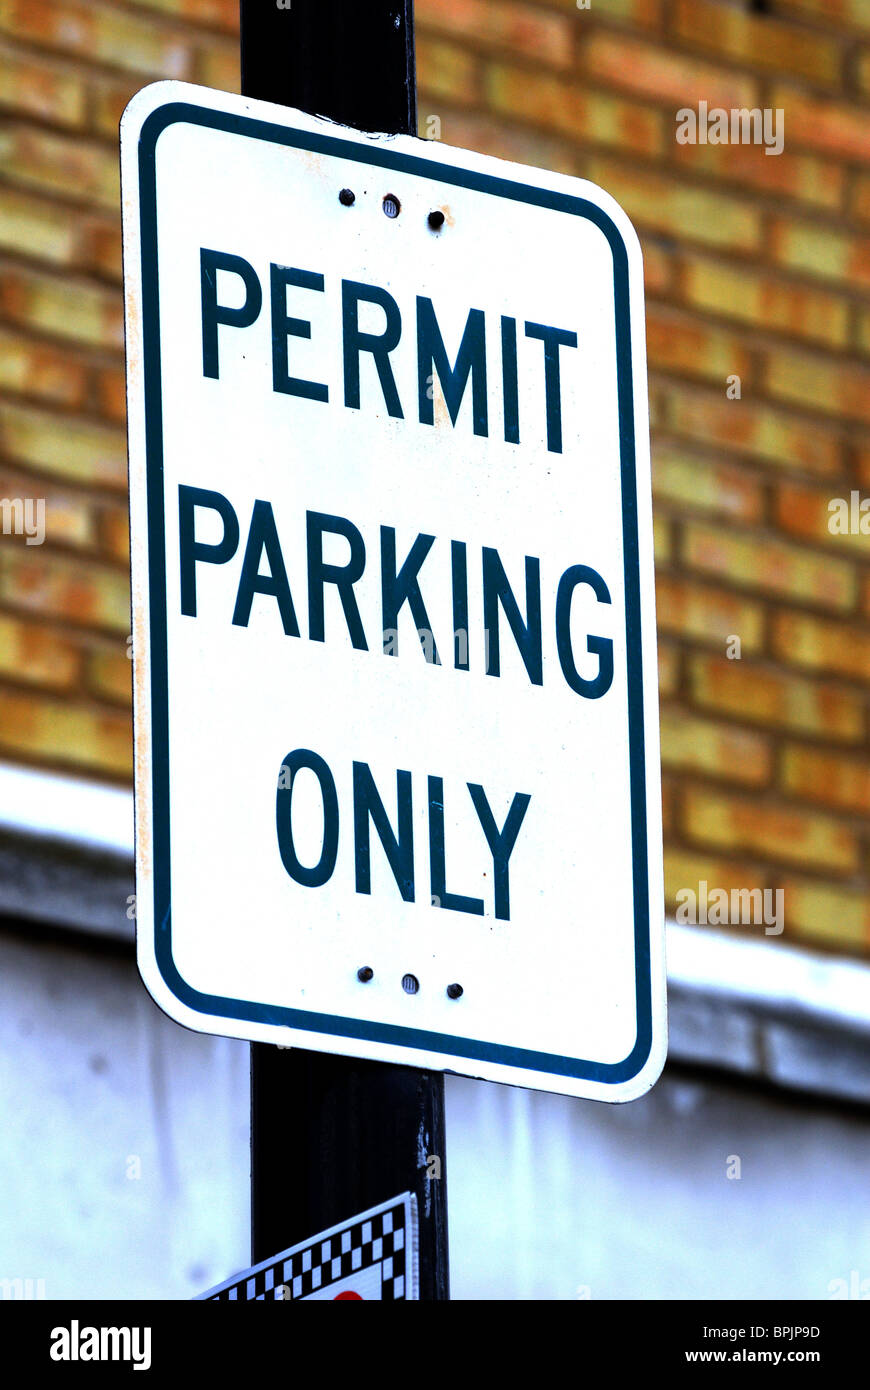 'Permit Parking Only' sign on post Stock Photo